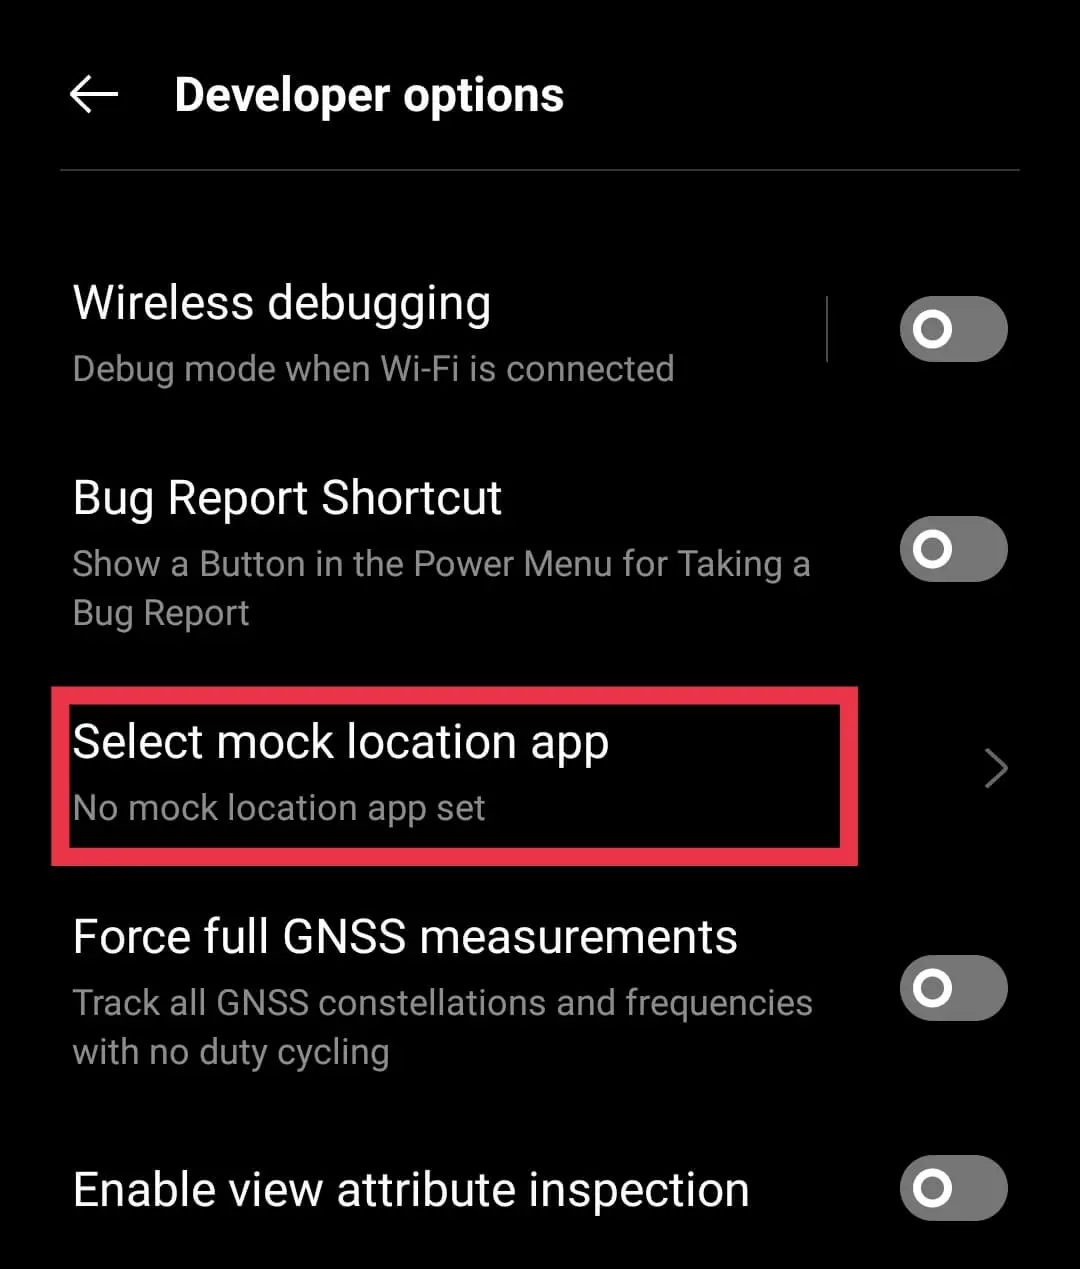 Select mock location app on Android developer options